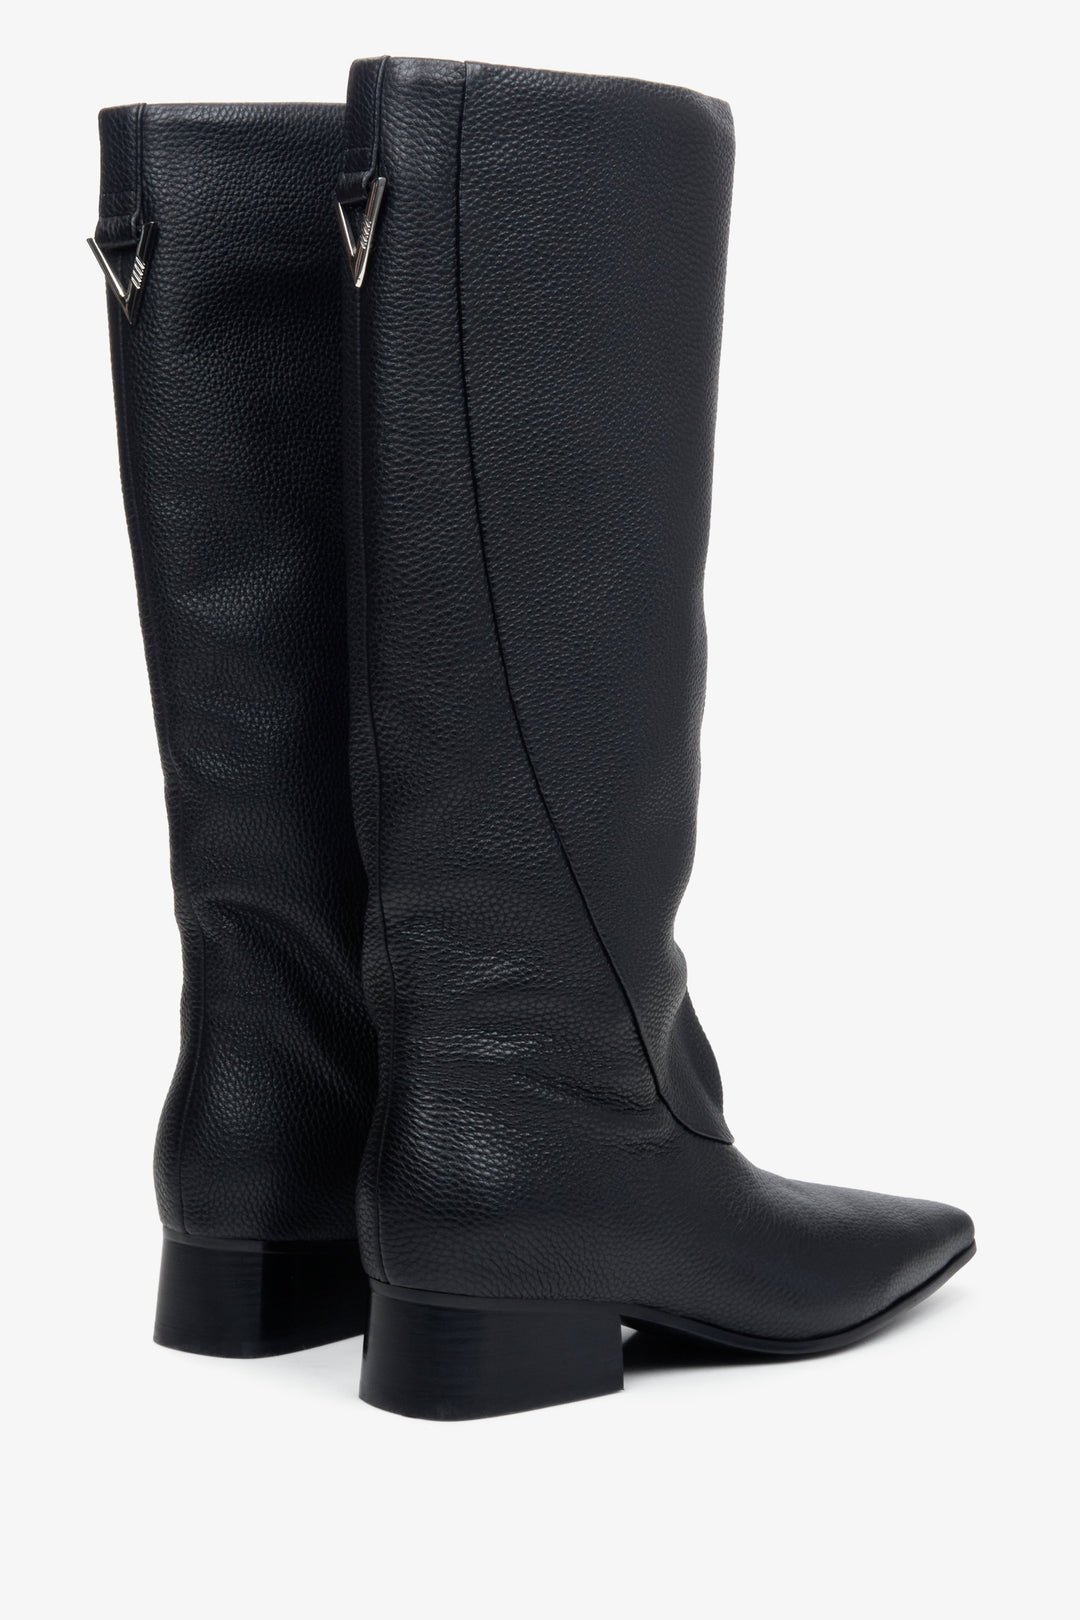 Women's black leather boots by Estro - close-up on the back of the model.